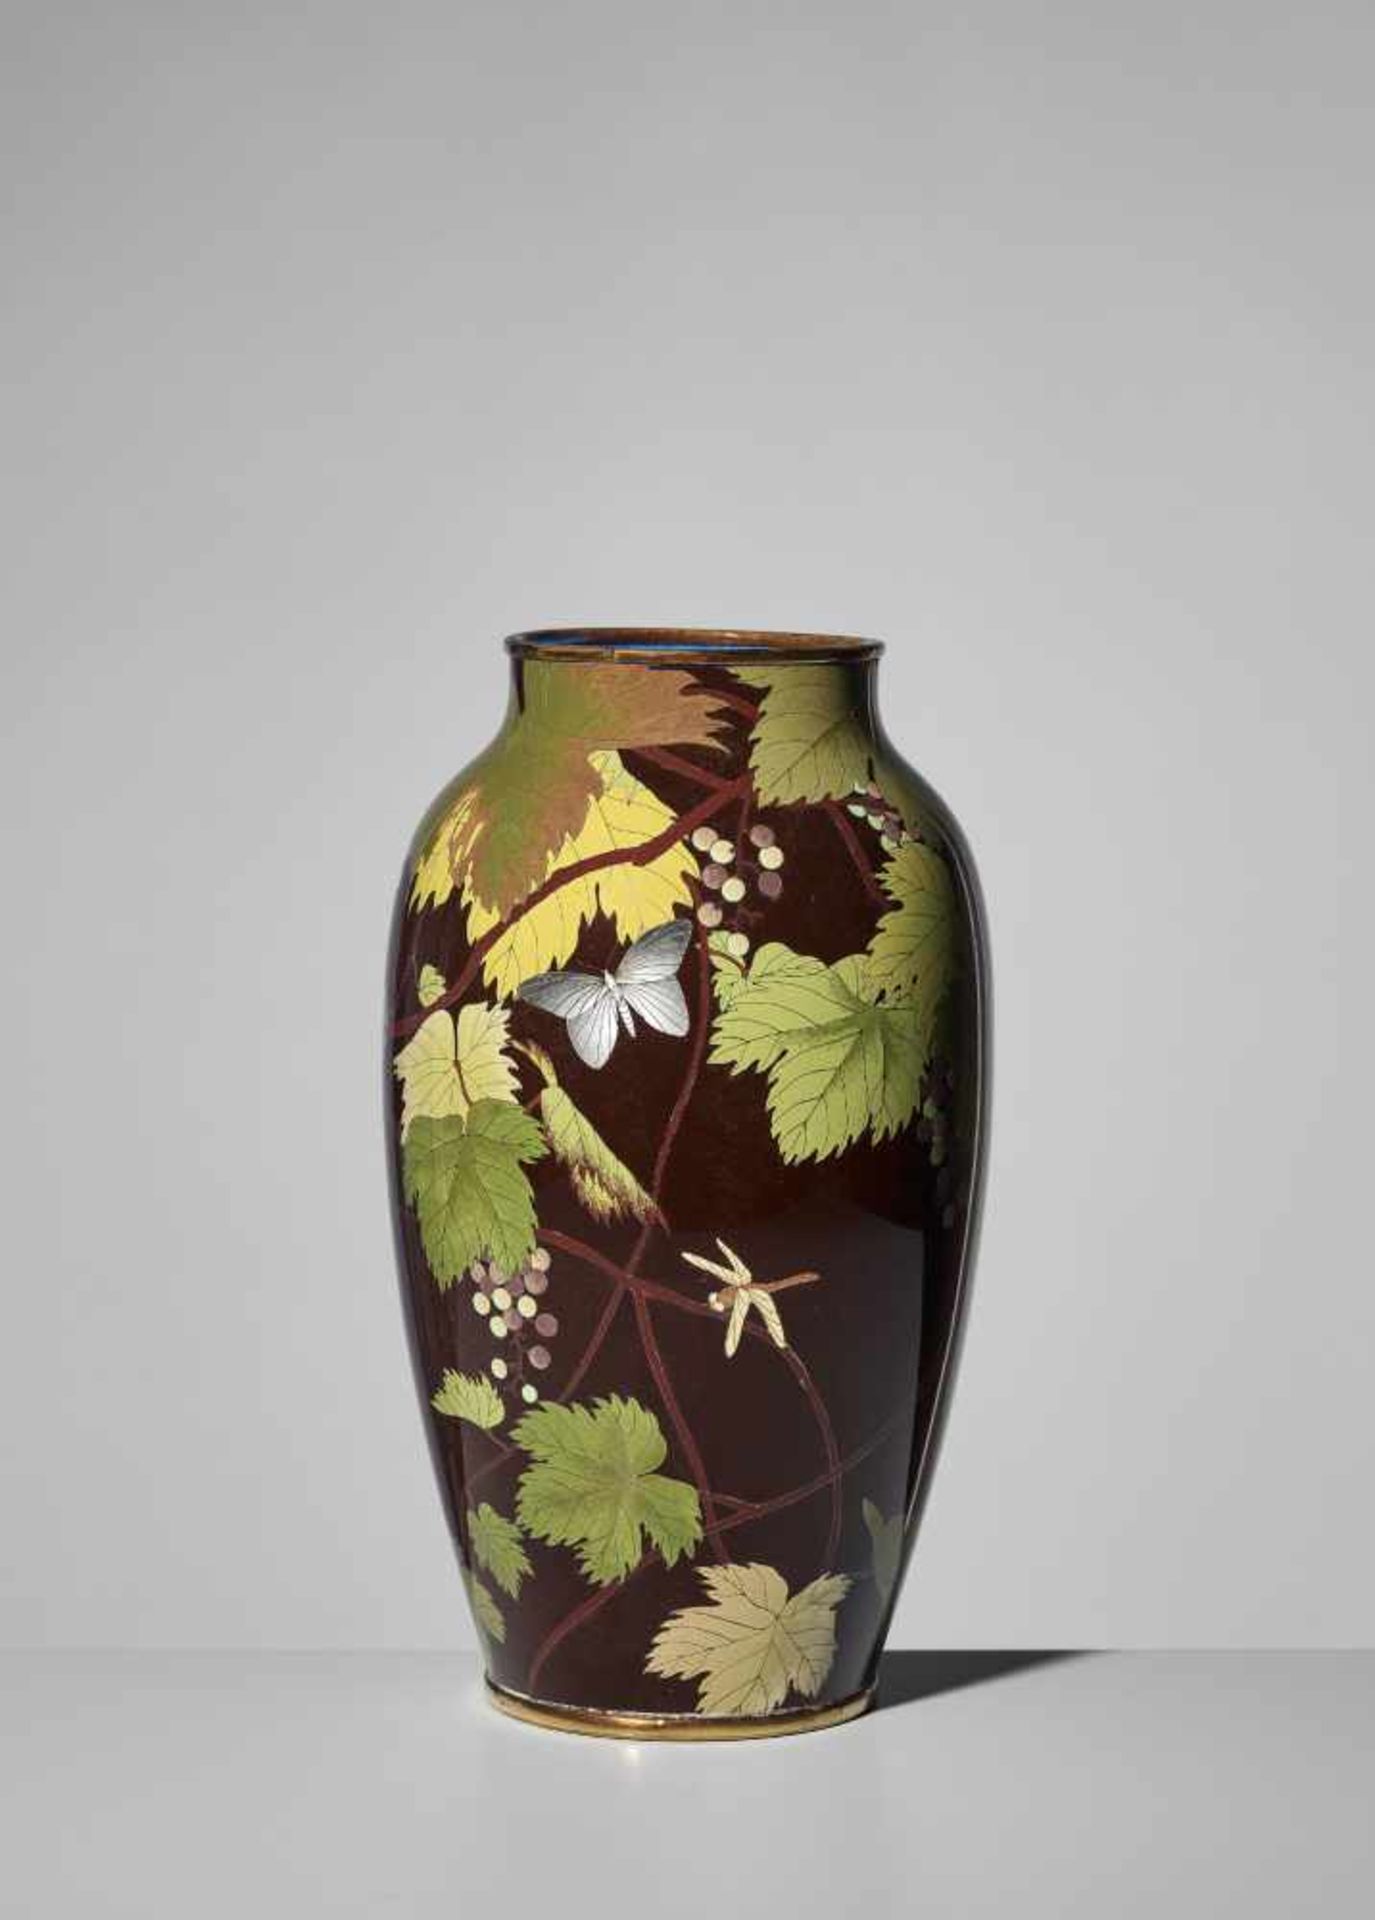 A LARGE AND FINE CLOISONNÉ ENAMEL VASE ATTRIBUTED TO THE ANDO COMPANY Unsigned, attributed to the